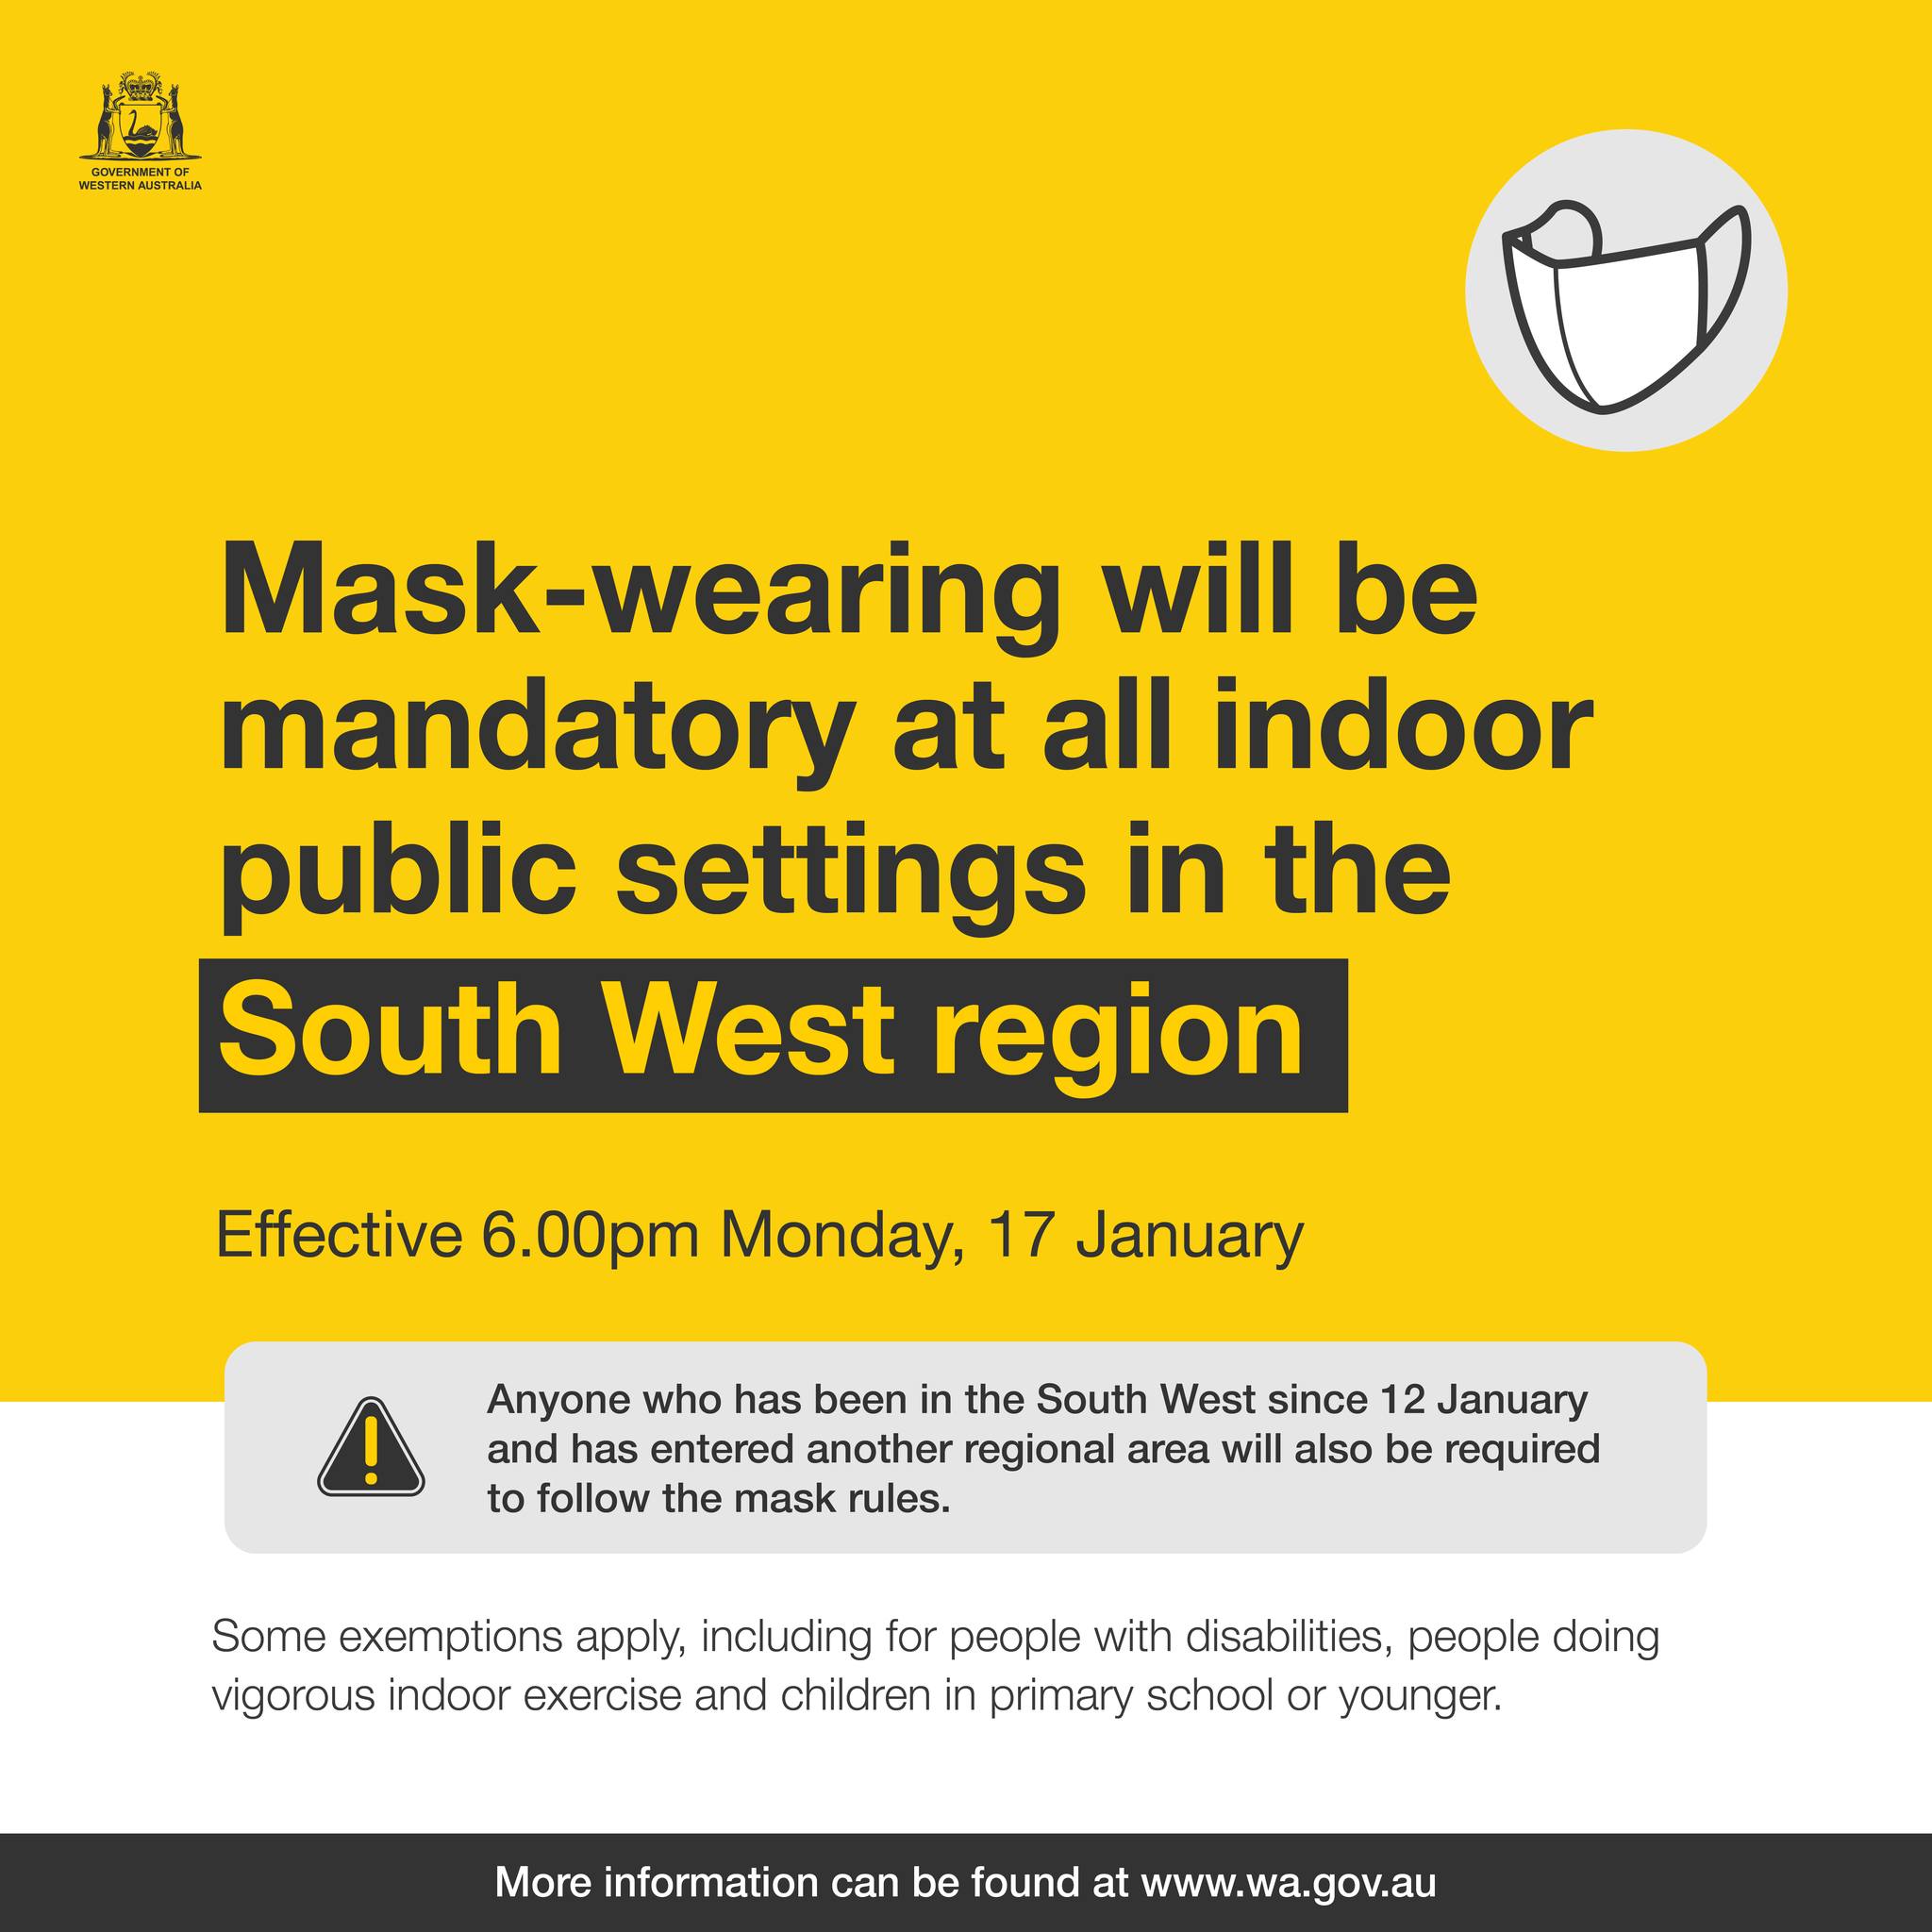 May be an image of text that says '골거 Mask-wearing will be mandatory at all indoor public settings in the South West region Effective 6.00pm Monday, 17 January Anyone who has been in the South West since 12 12 January and has entered another regional area will also be required to follow the mask rules. Some exemptions apply, including for poople with disabilitios, poople doing vigorous indoor exercise and children in primary school or younger. More information can be ound at www.wa.gov.au'